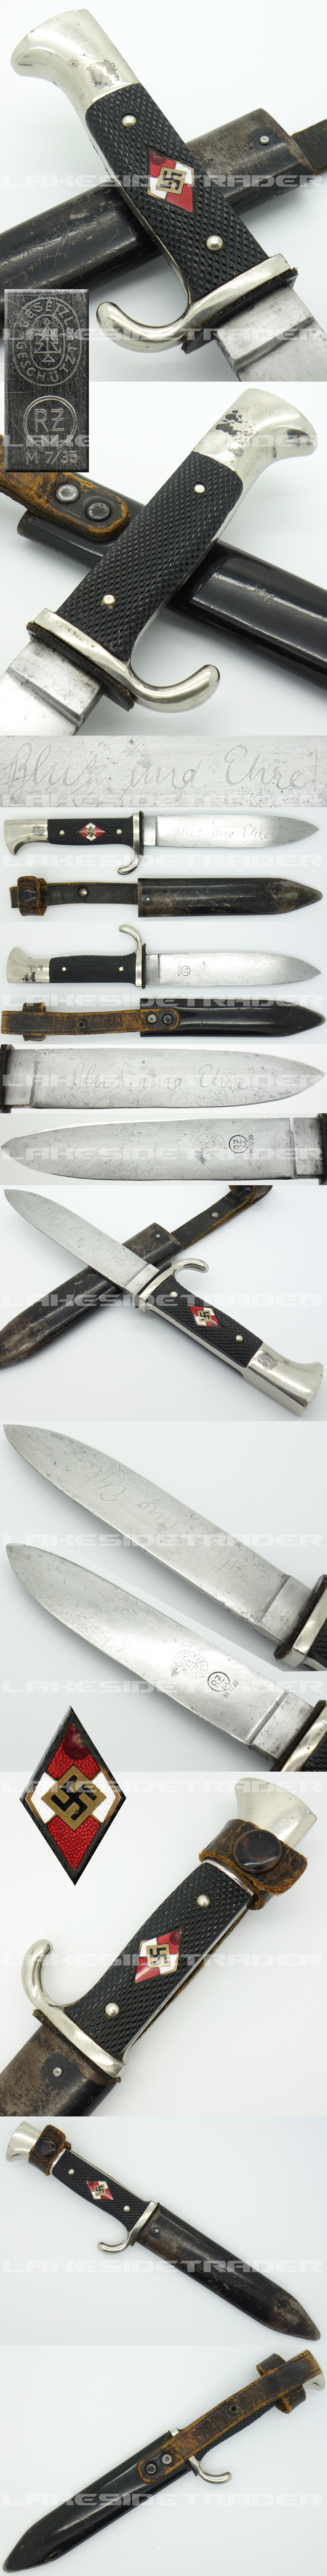 Transitional Hitler Youth Knife by W. Halbach